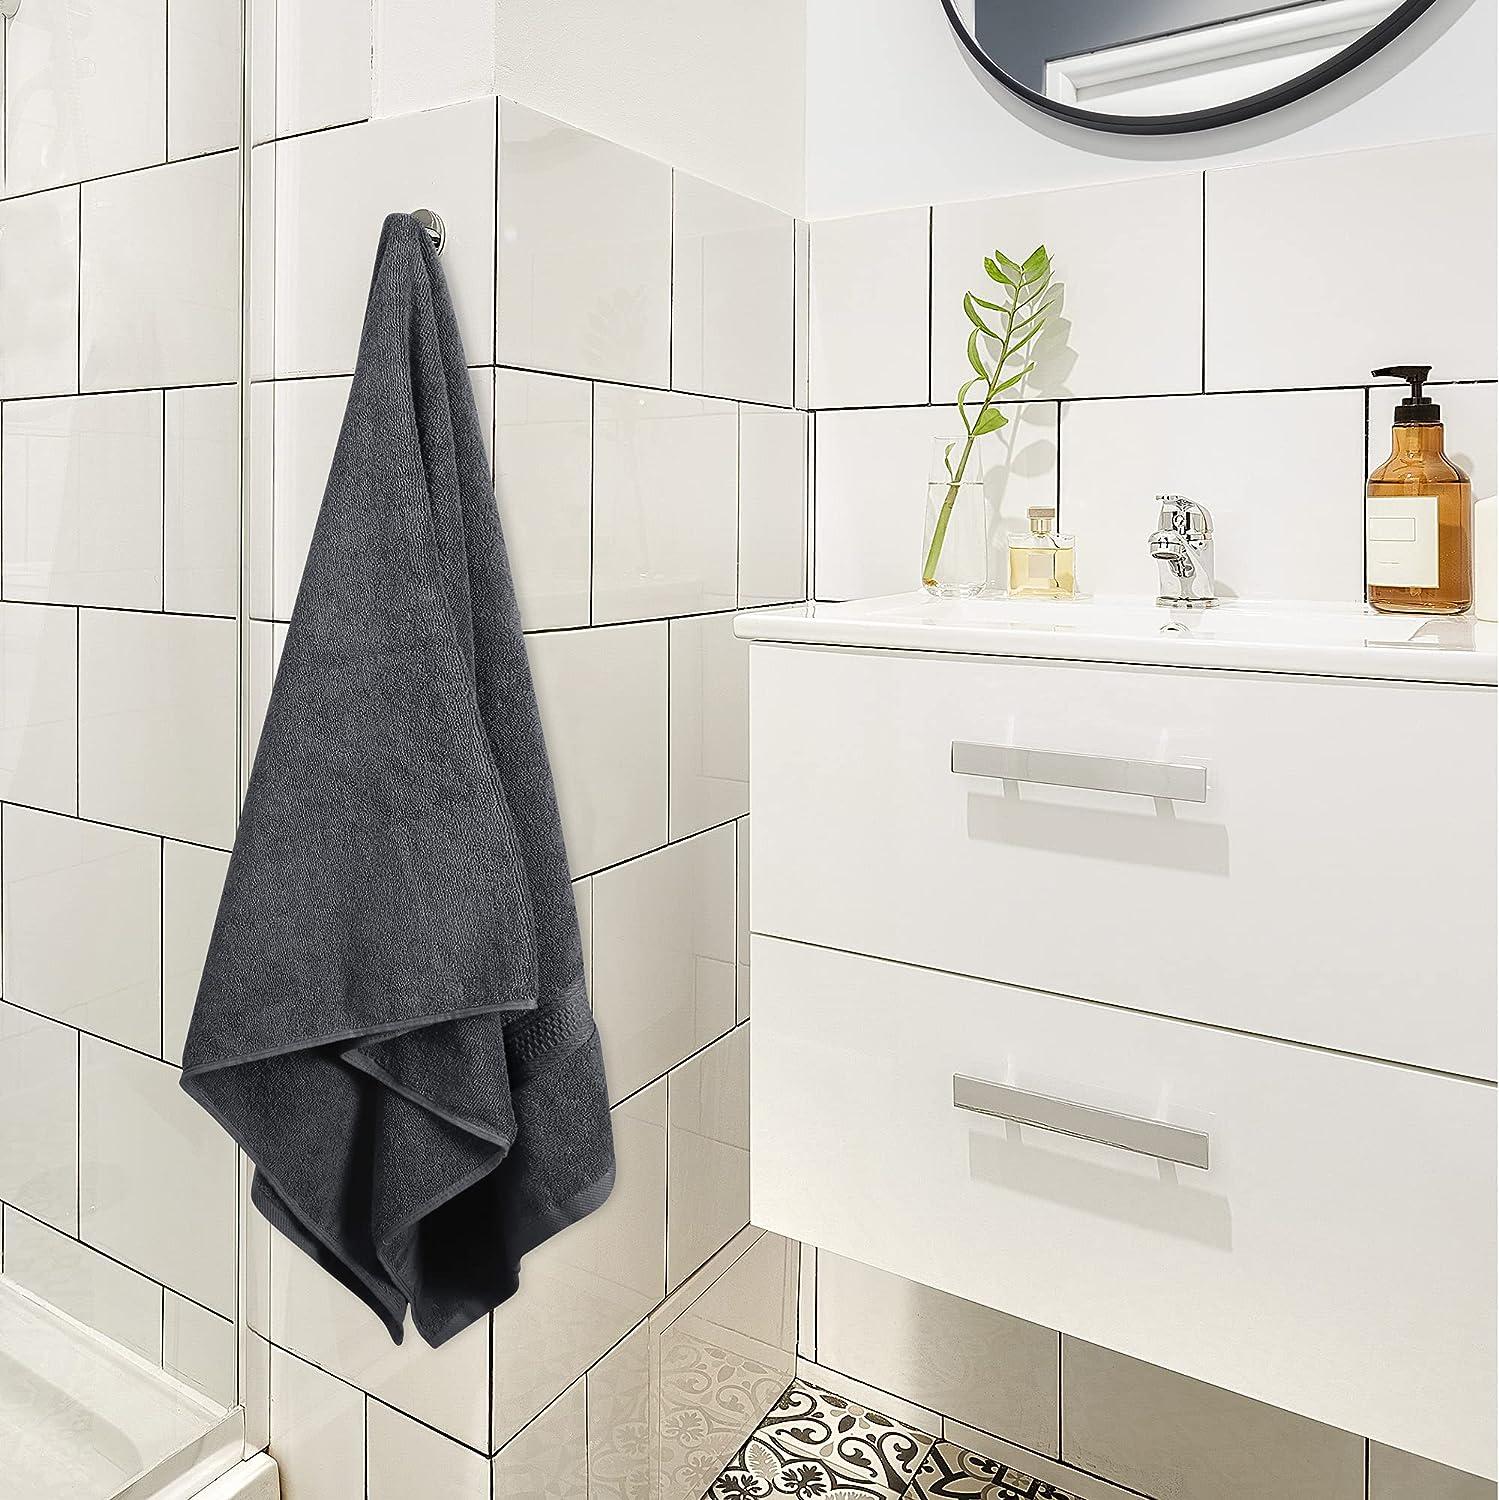 Utopia Towels - Bath Towels Set, Grey - Premium 600 GSM 100% Ring Spun  Cotton - Quick Dry, Highly Absorbent, Soft Feel Towels, P